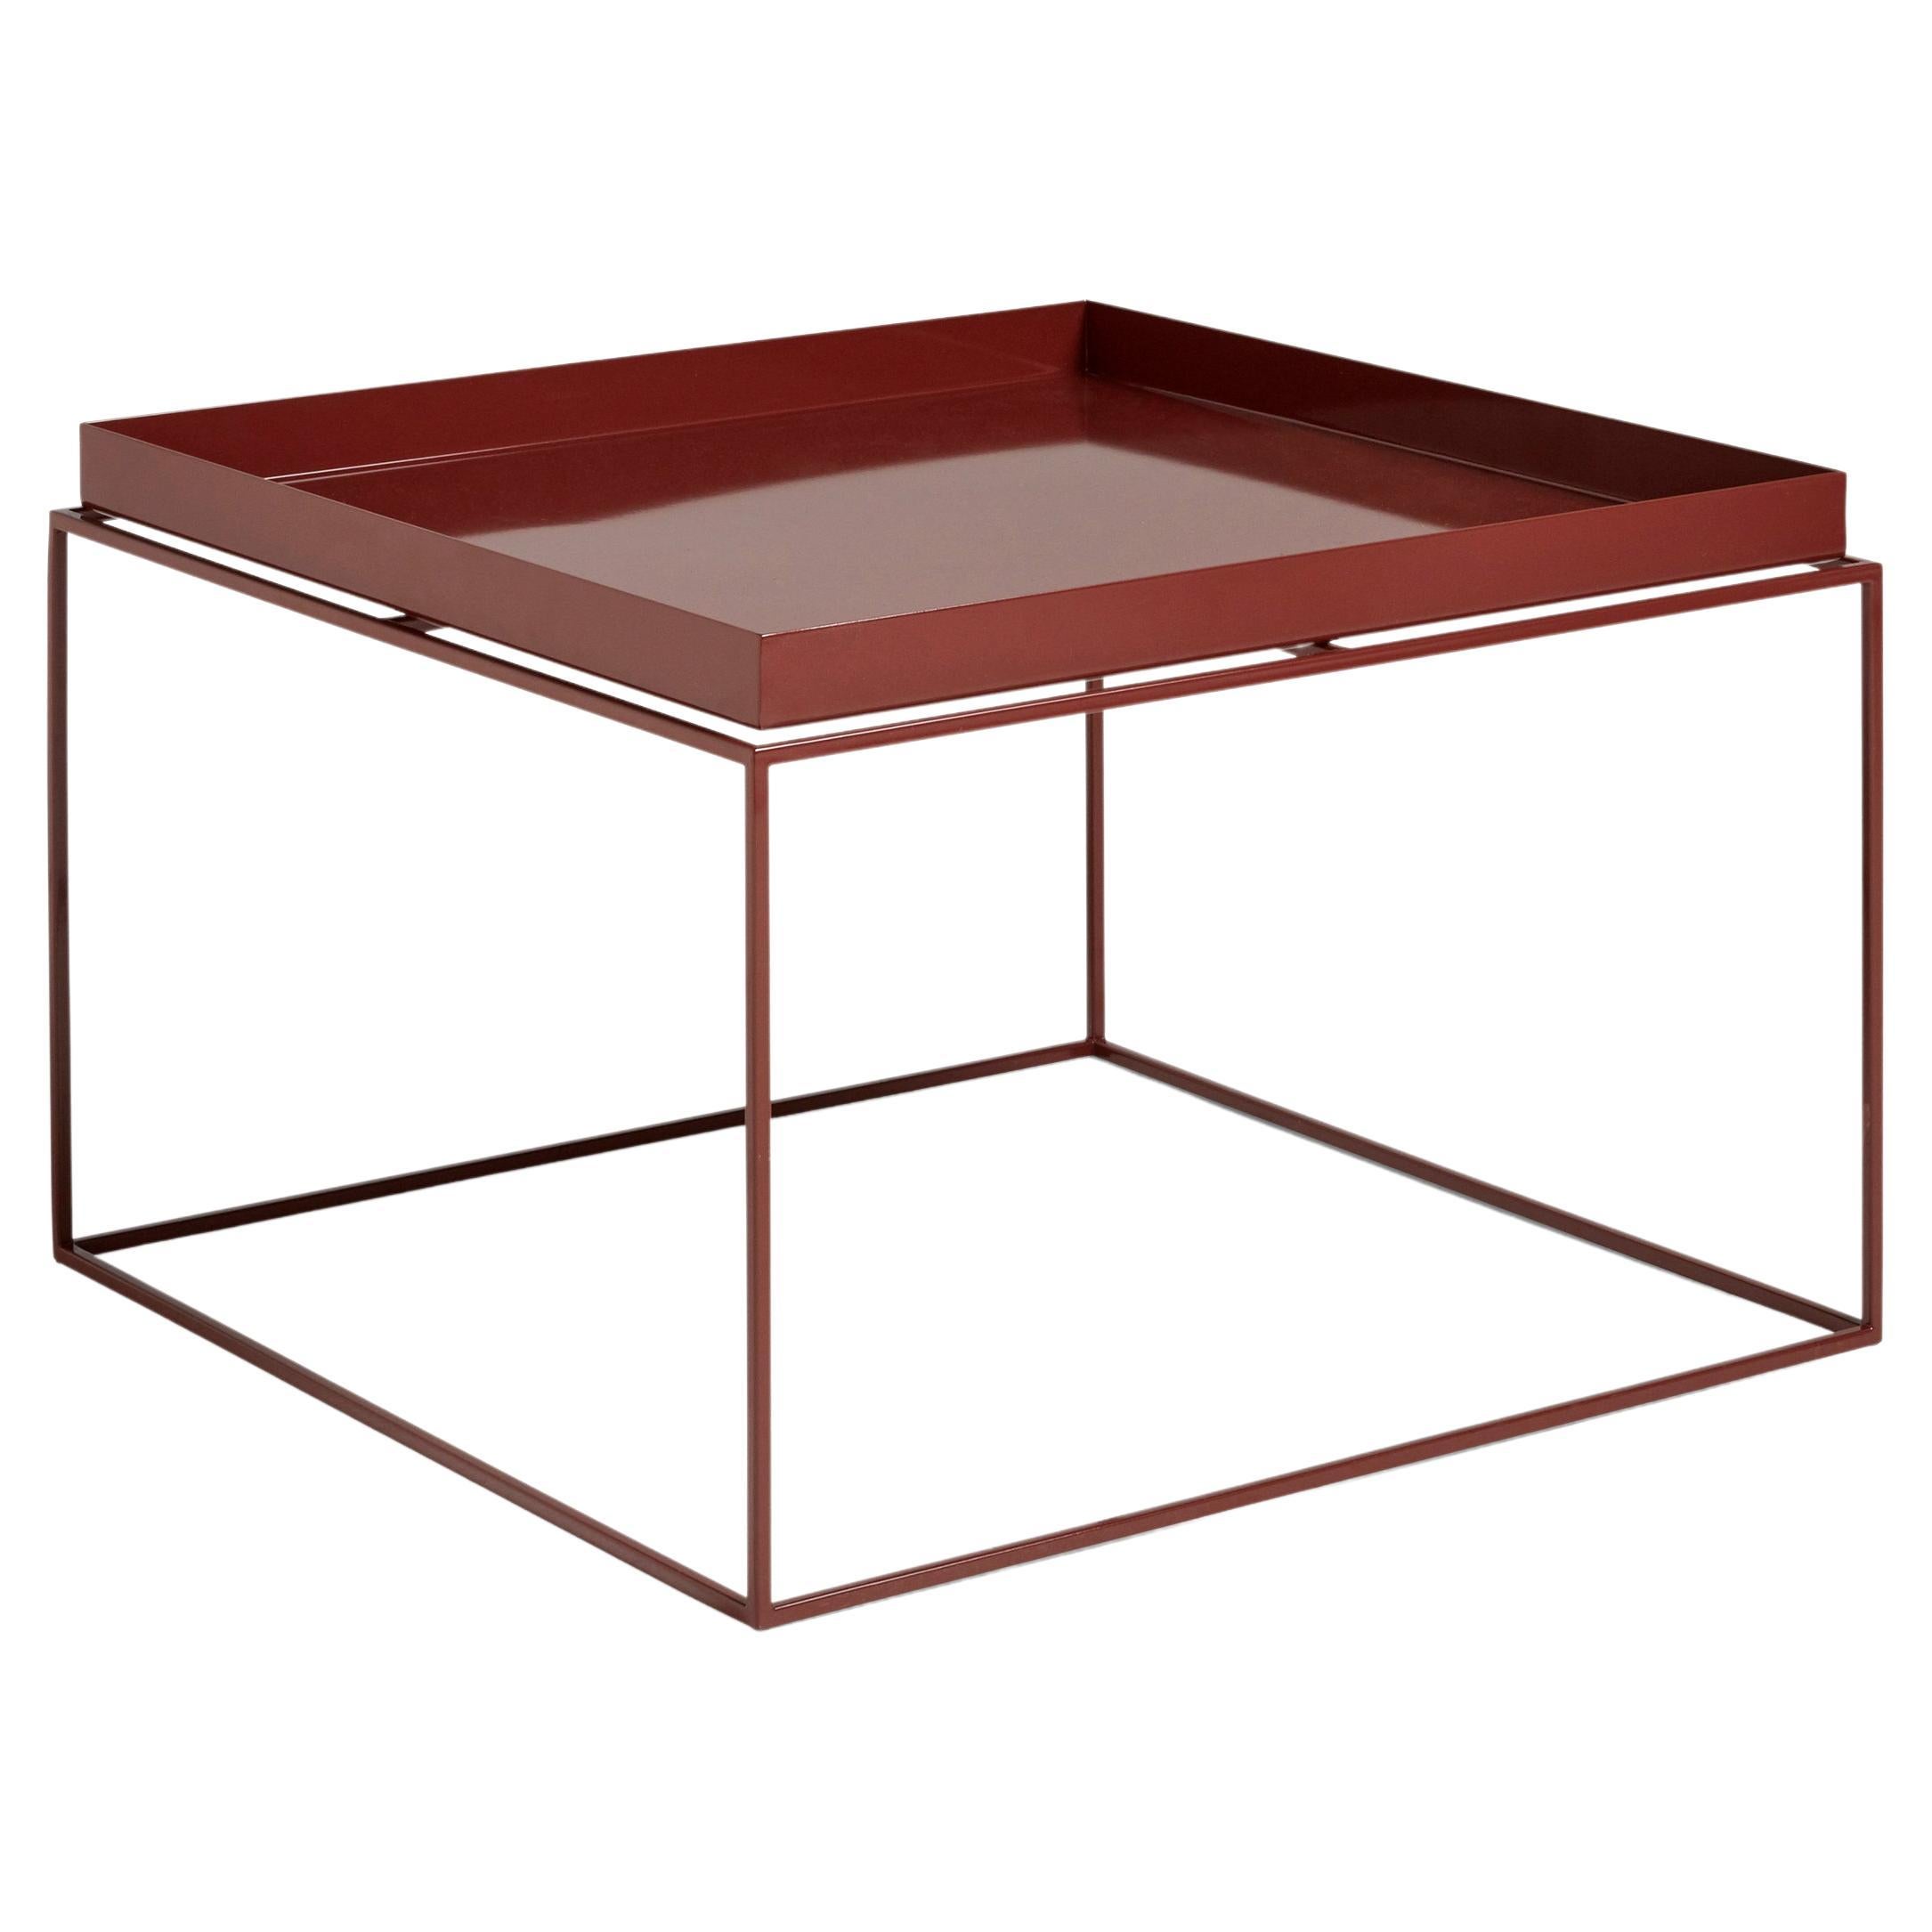 Tray Coffee Table, Chocolate High Gloss Powder Coated Steel, by Hay For Sale